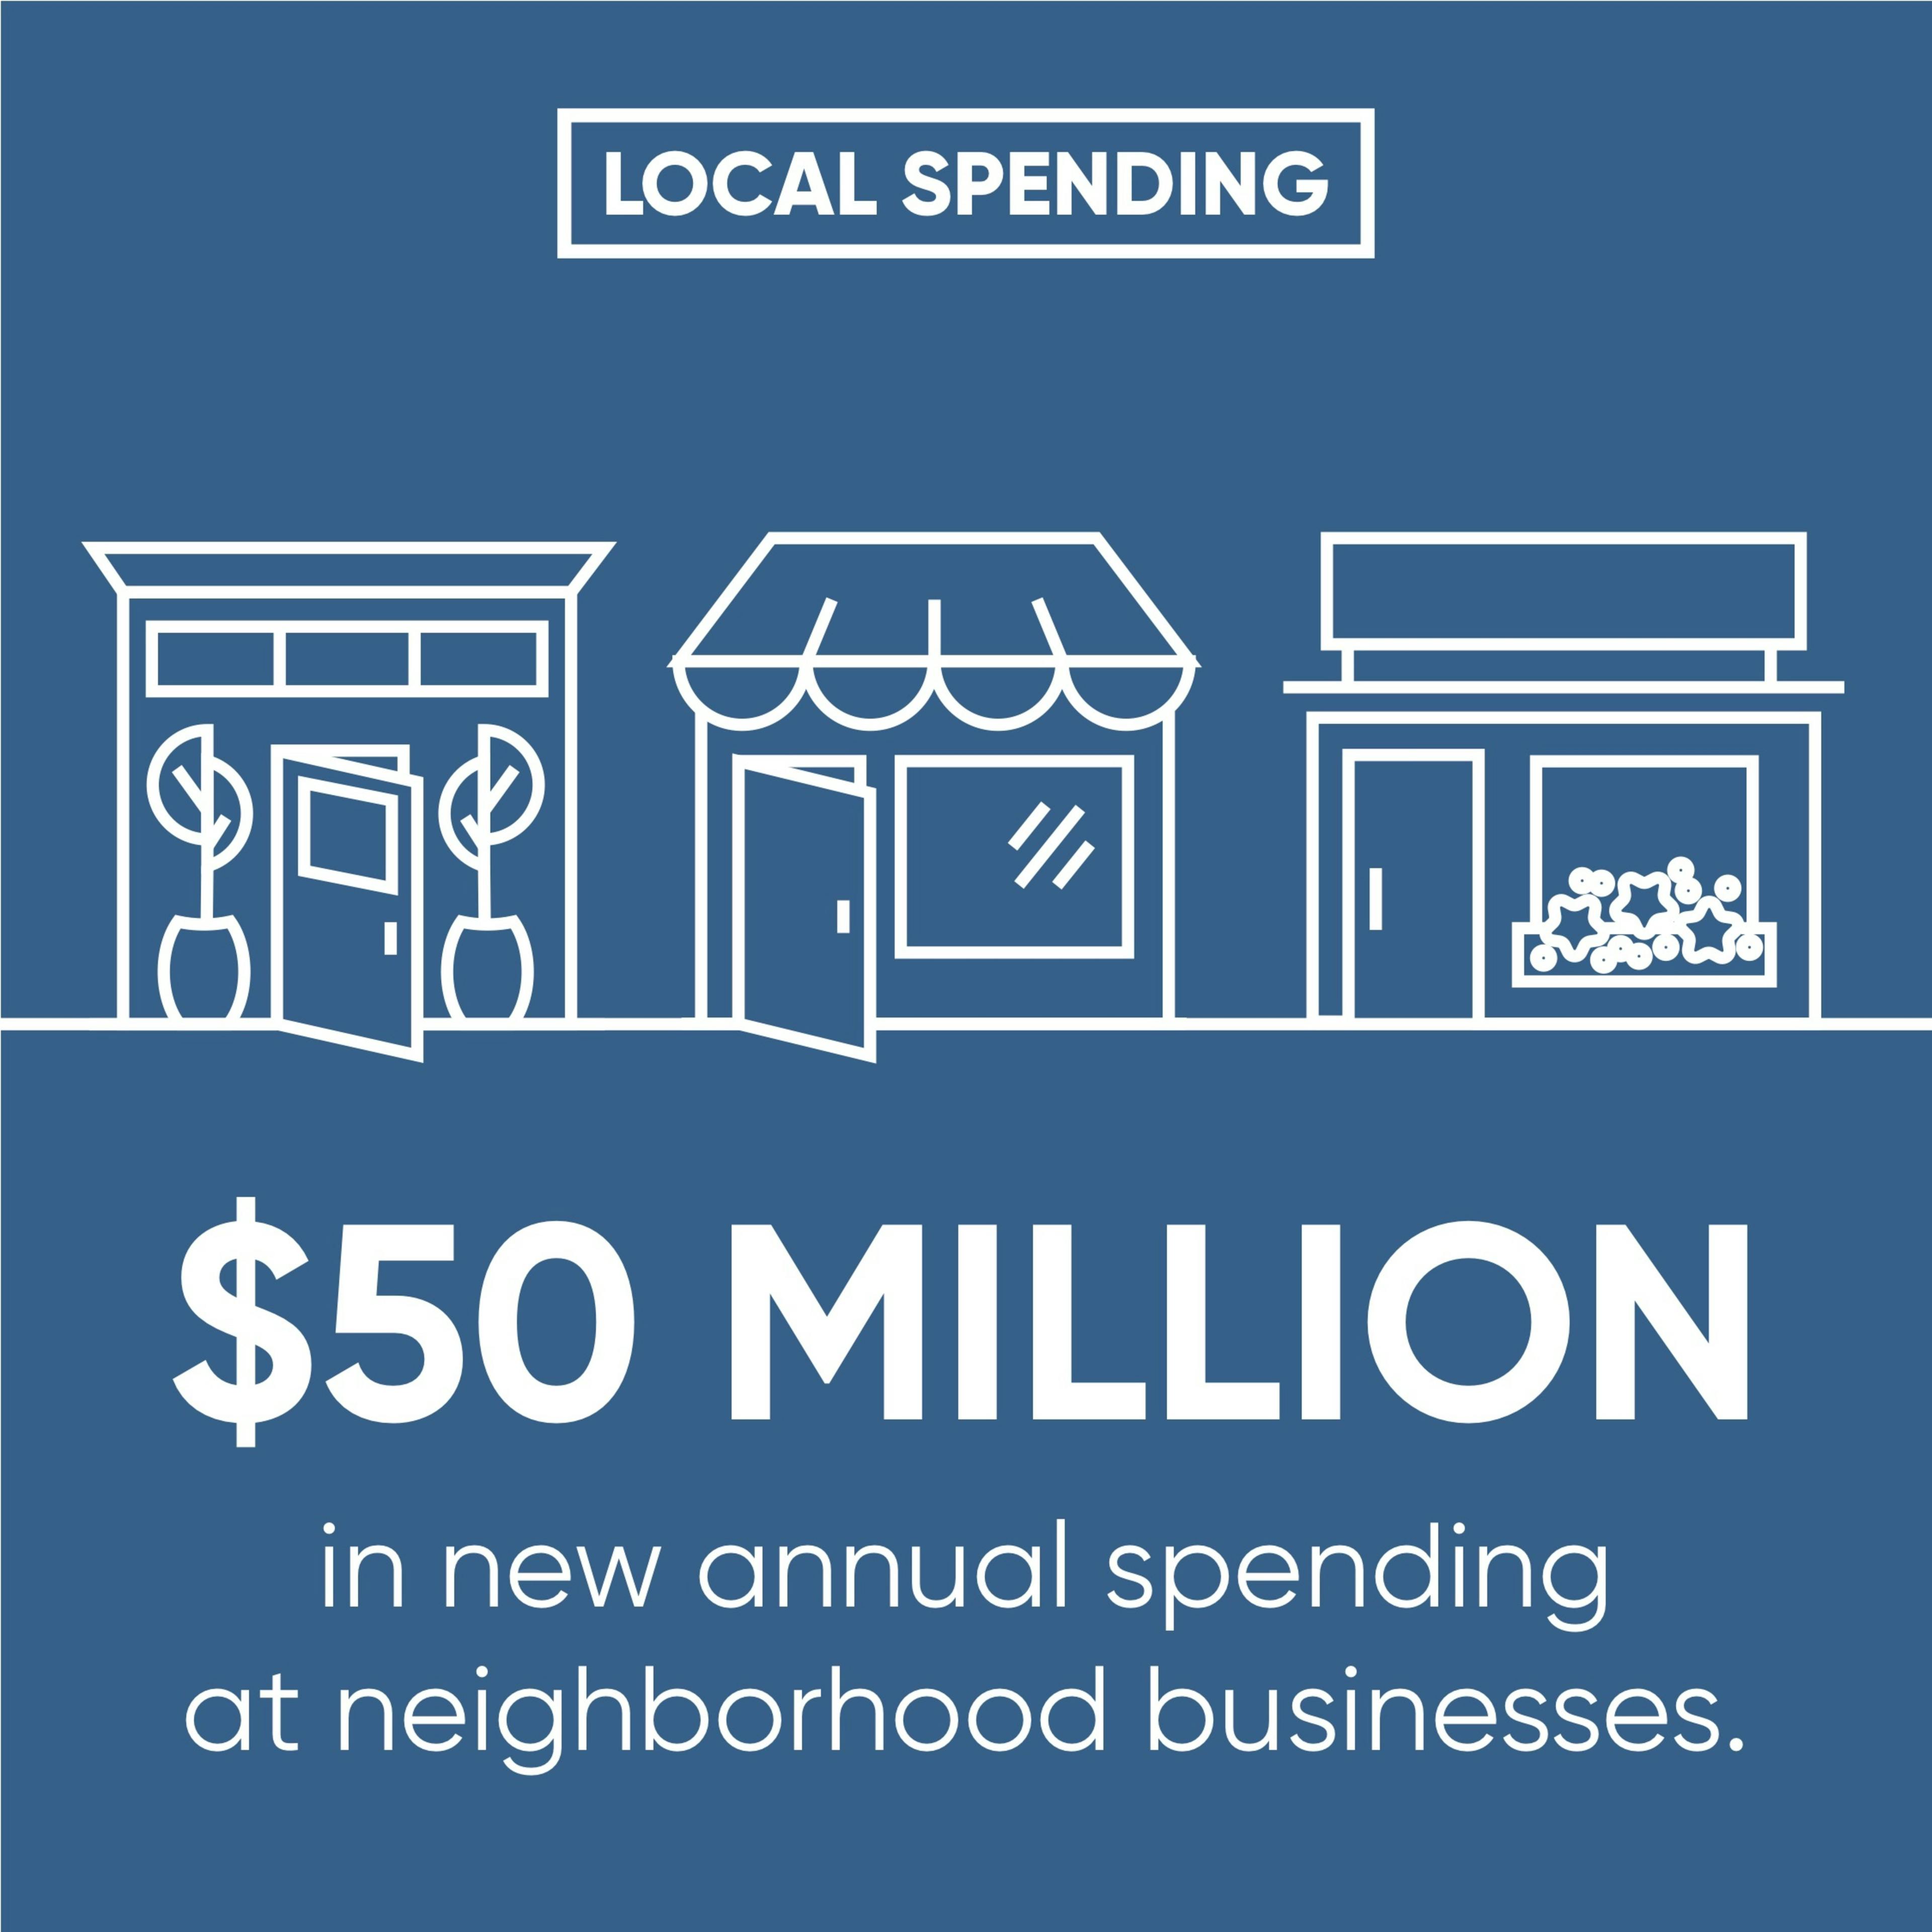 Infographic text: Local Spending. $50 Million in new annual spending at neighborhood businesses. 